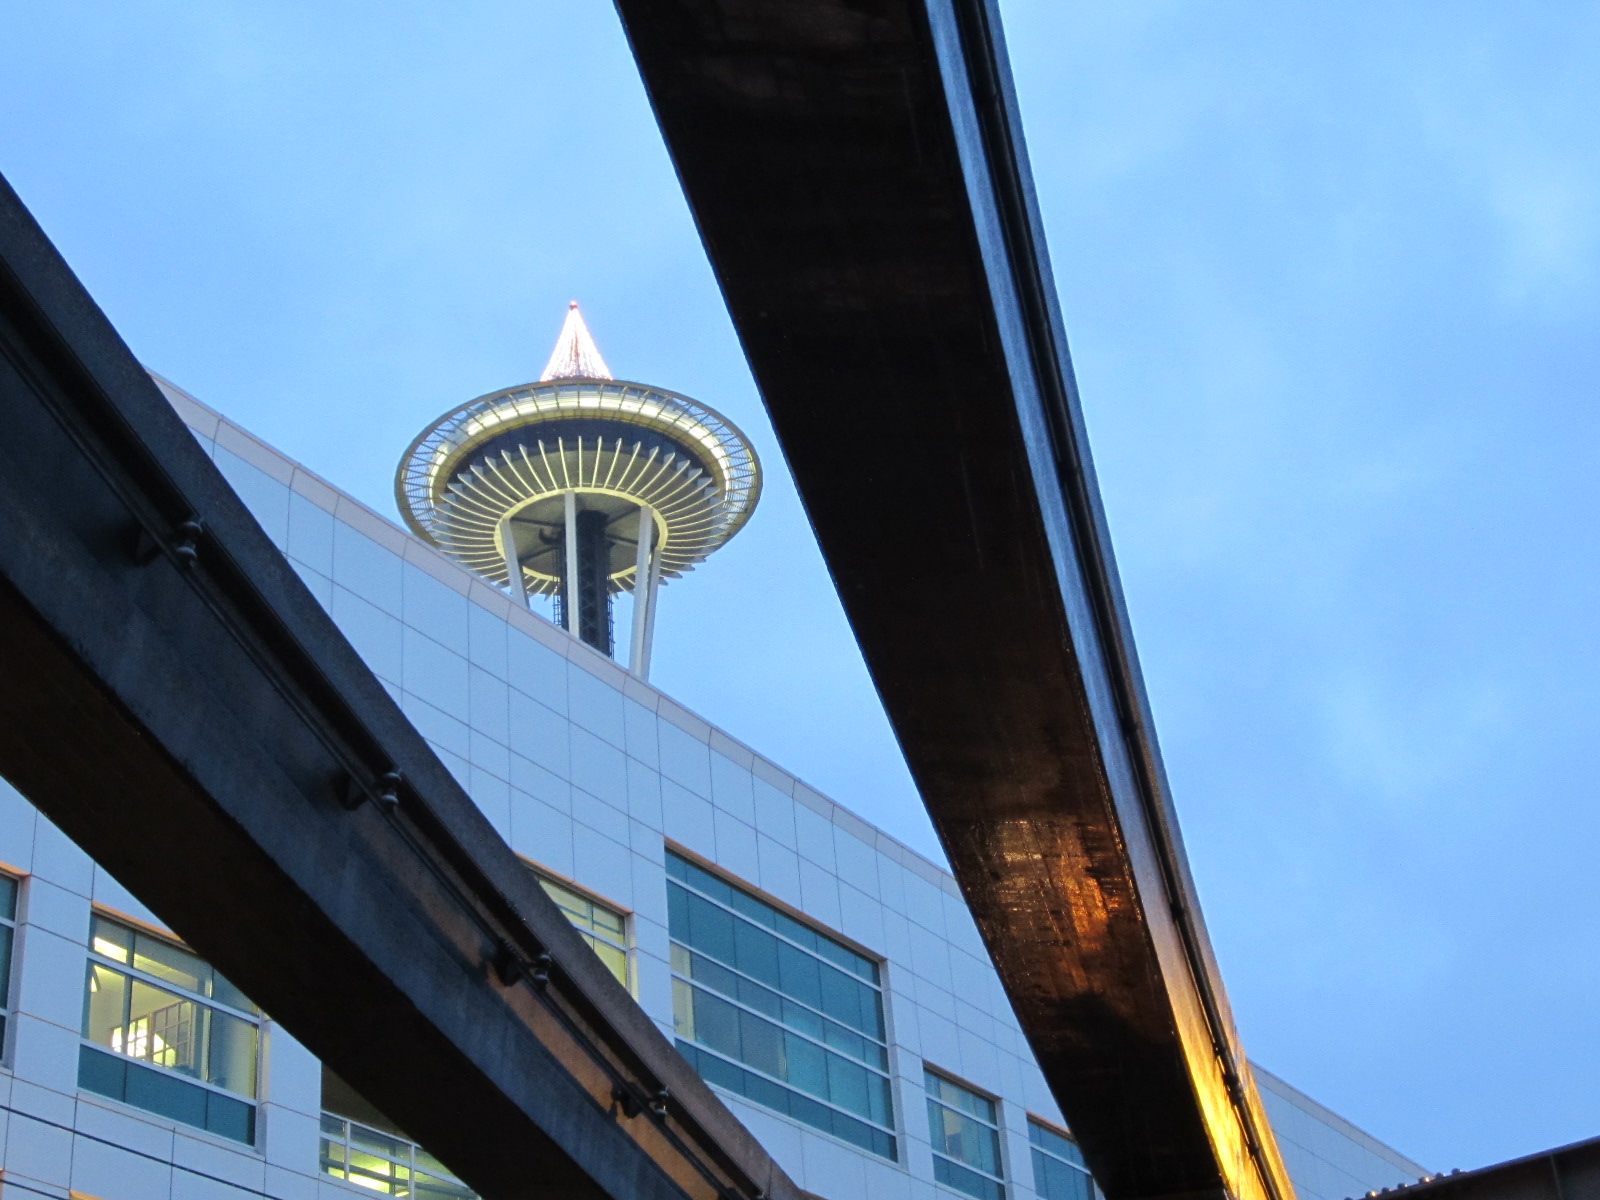 The Space Needle seen through the rails of the monorail.